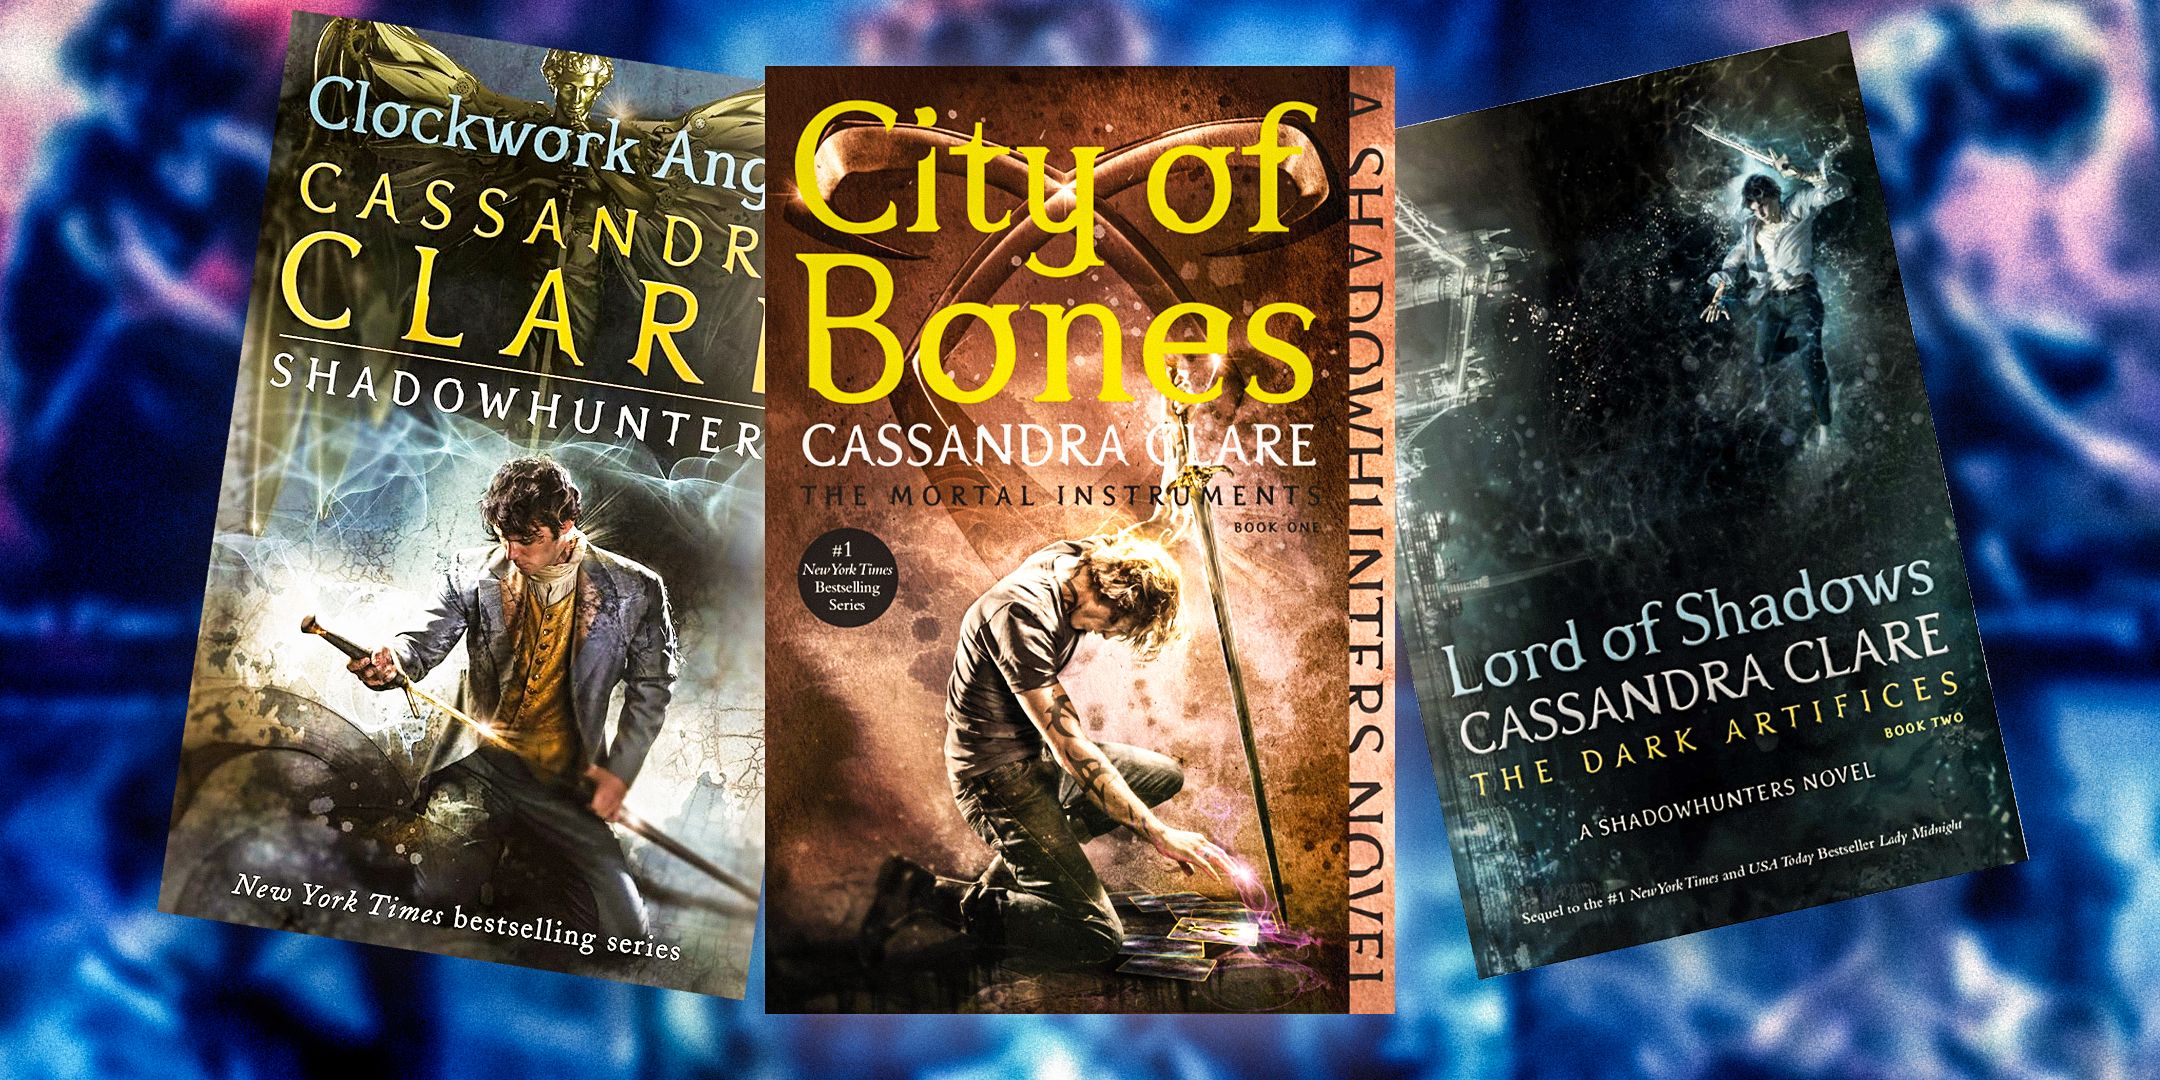 The covers of Clockwork Angel, City of Bones, and Lord of Shadows by Cassandra Clare